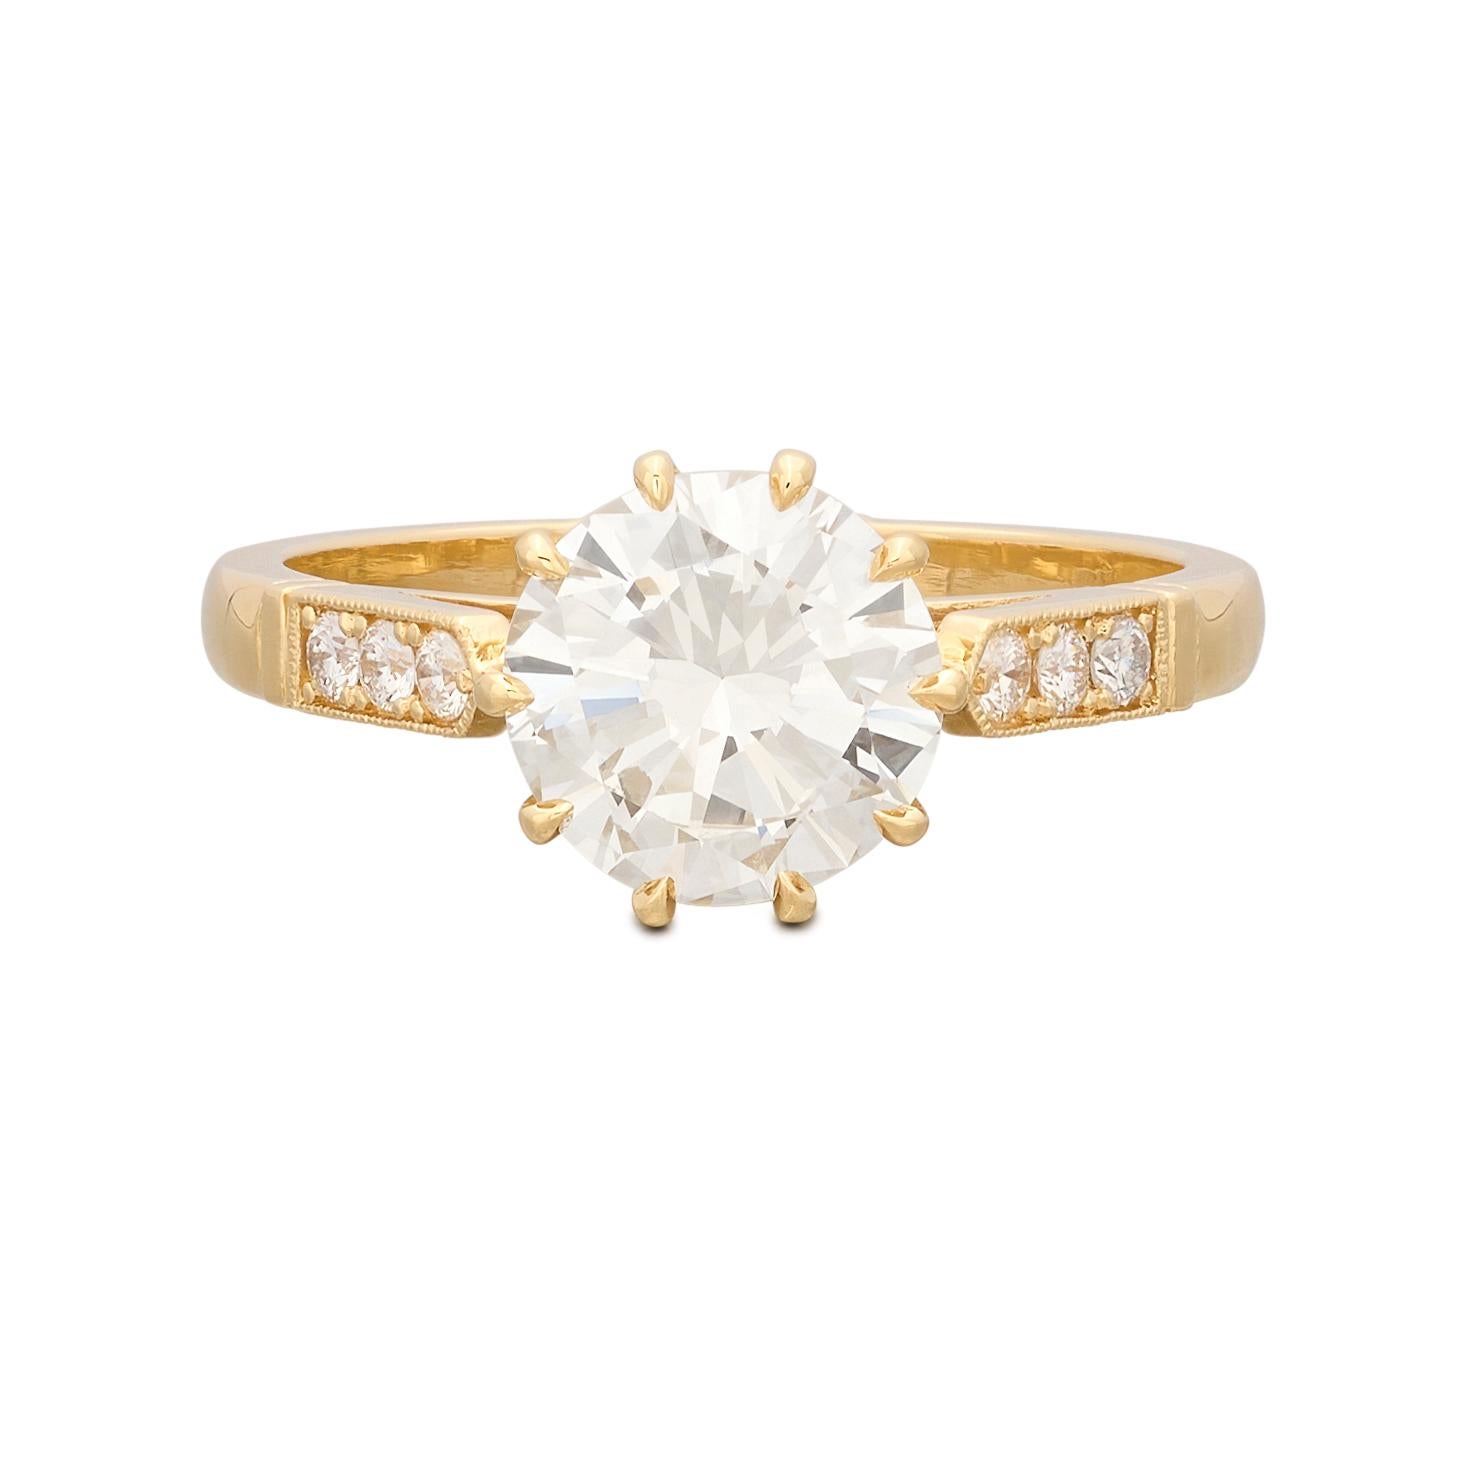 Estate GIA 1.84ct Diamond & Gold Engagement Ring For Sale 2